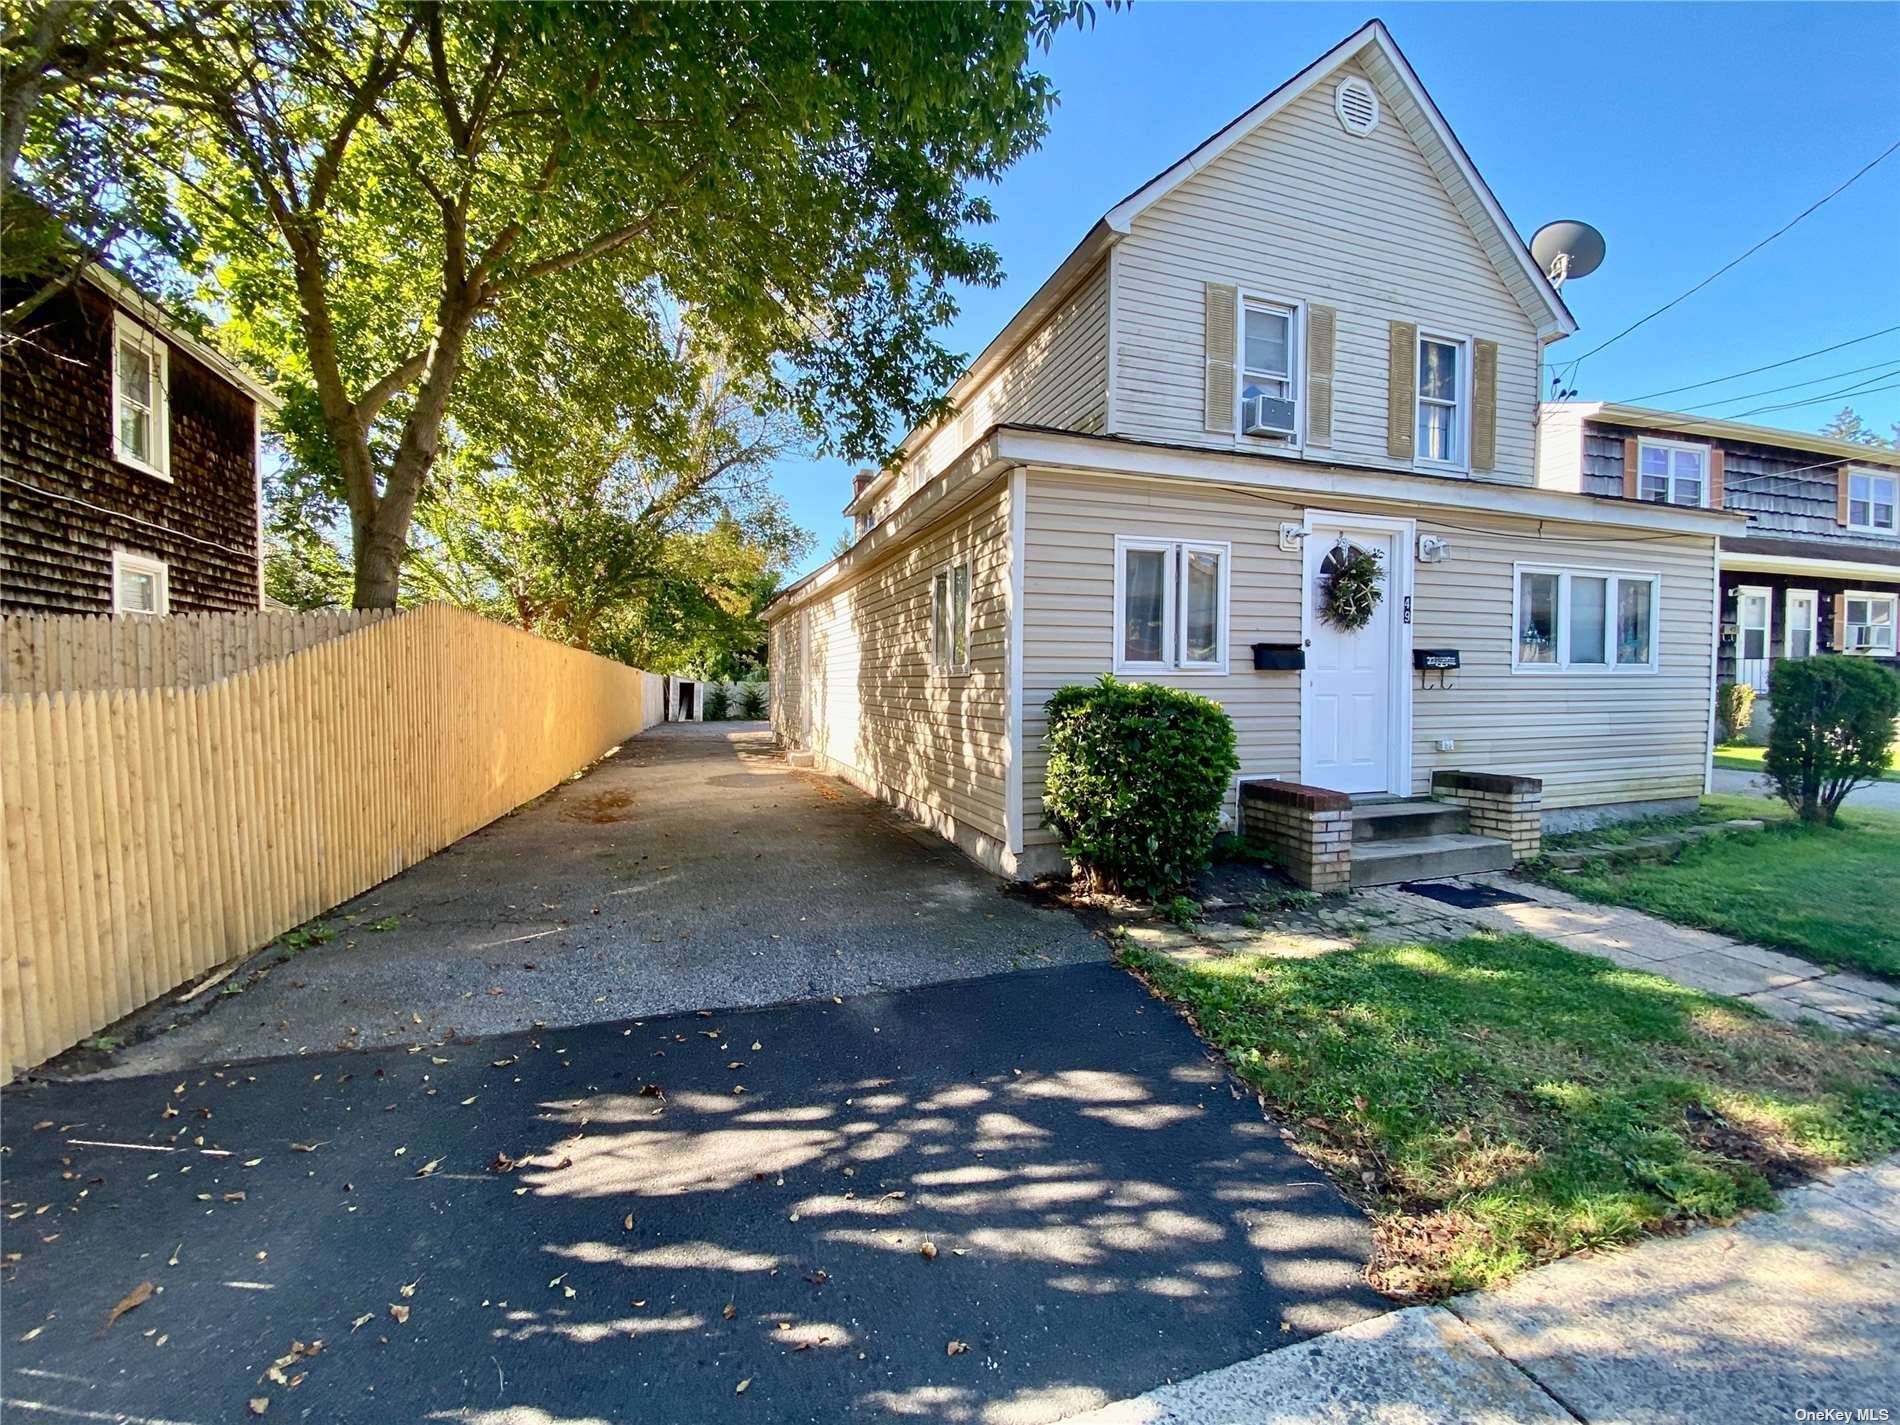 Legal 2 Family by CO in the Heart of Amityville Village ; Walking Distance to Village Shops, Restaurants, Nightlife amp ; LIRR.